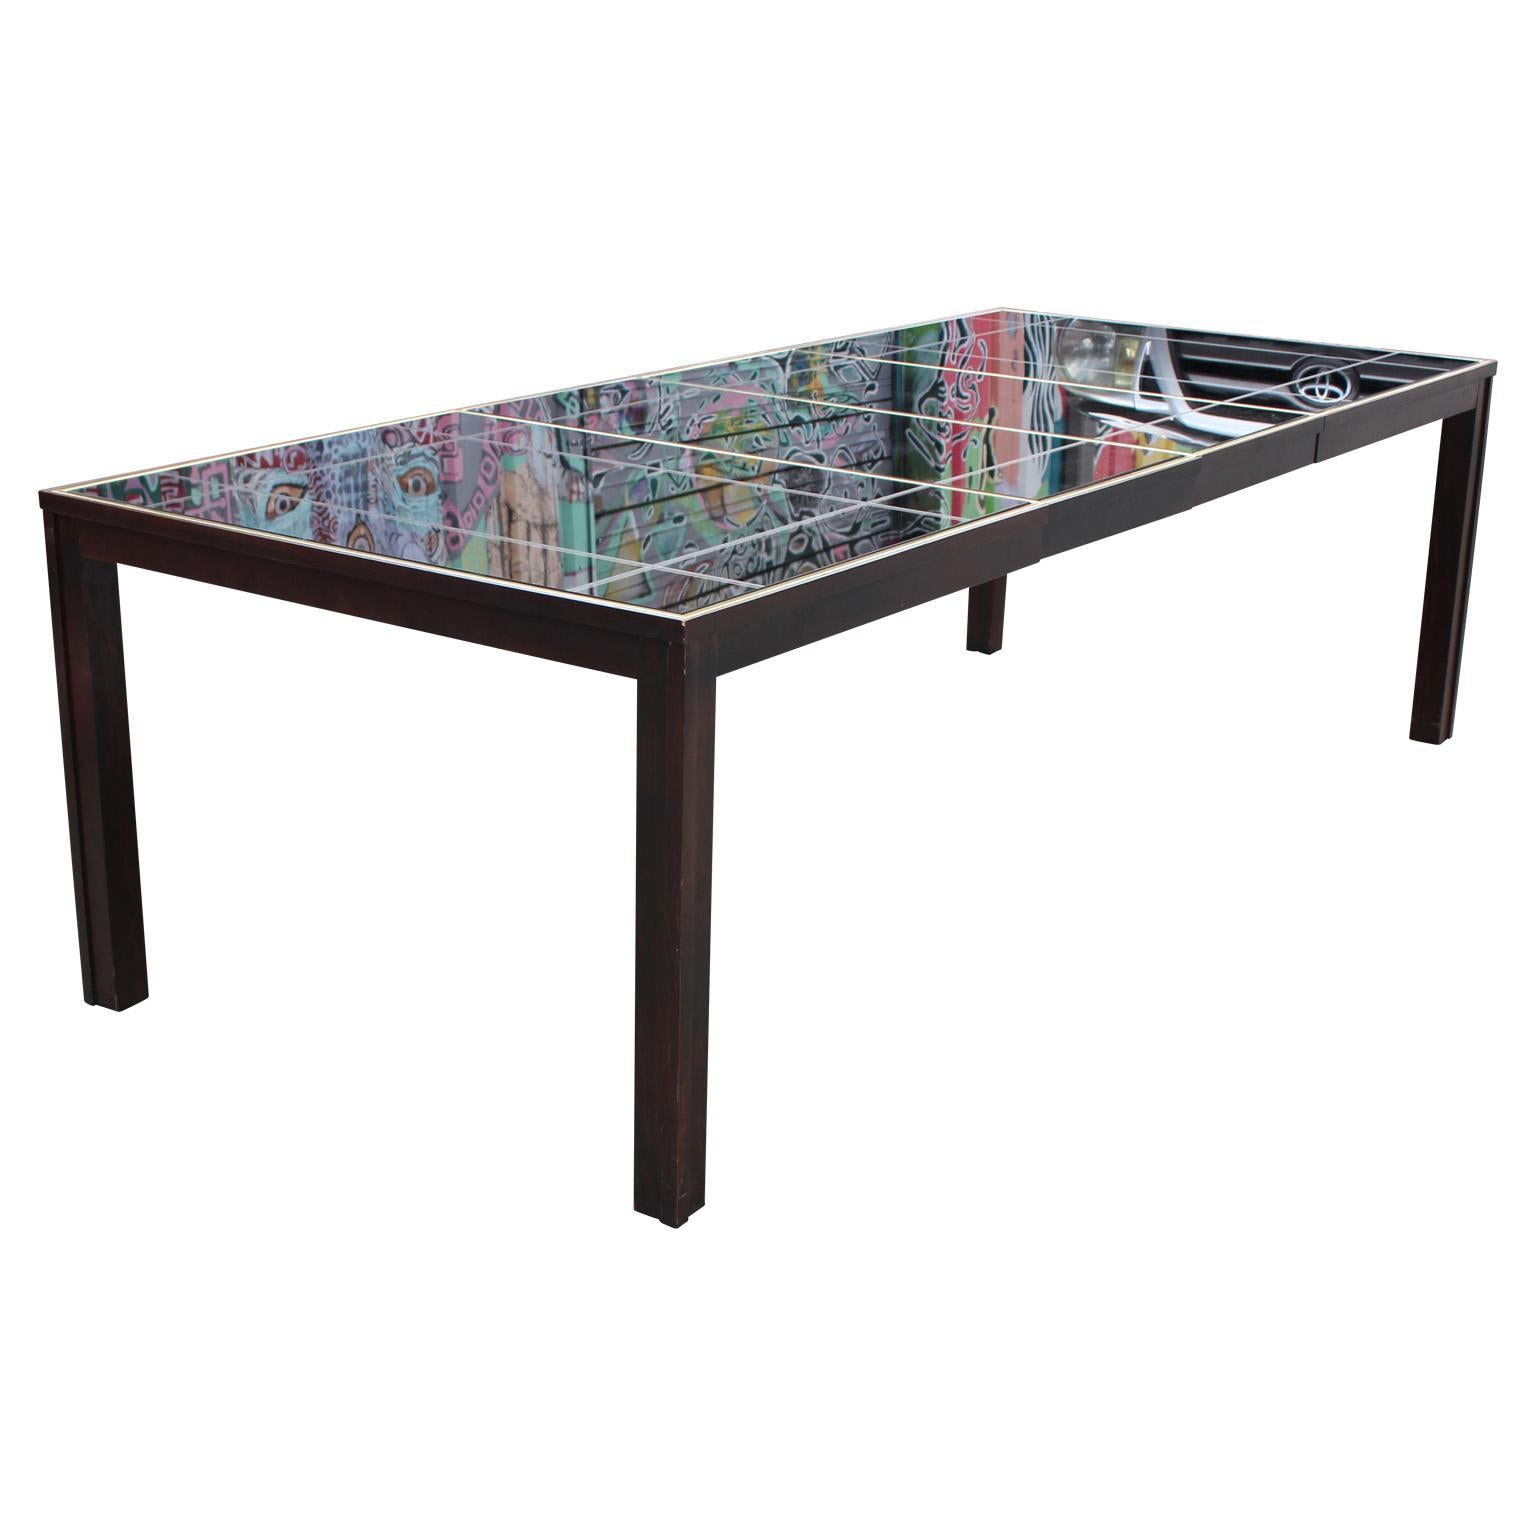 Modern Rectangular Black Dining Table with a Smoked Mirror Top and Brass Inlay 1